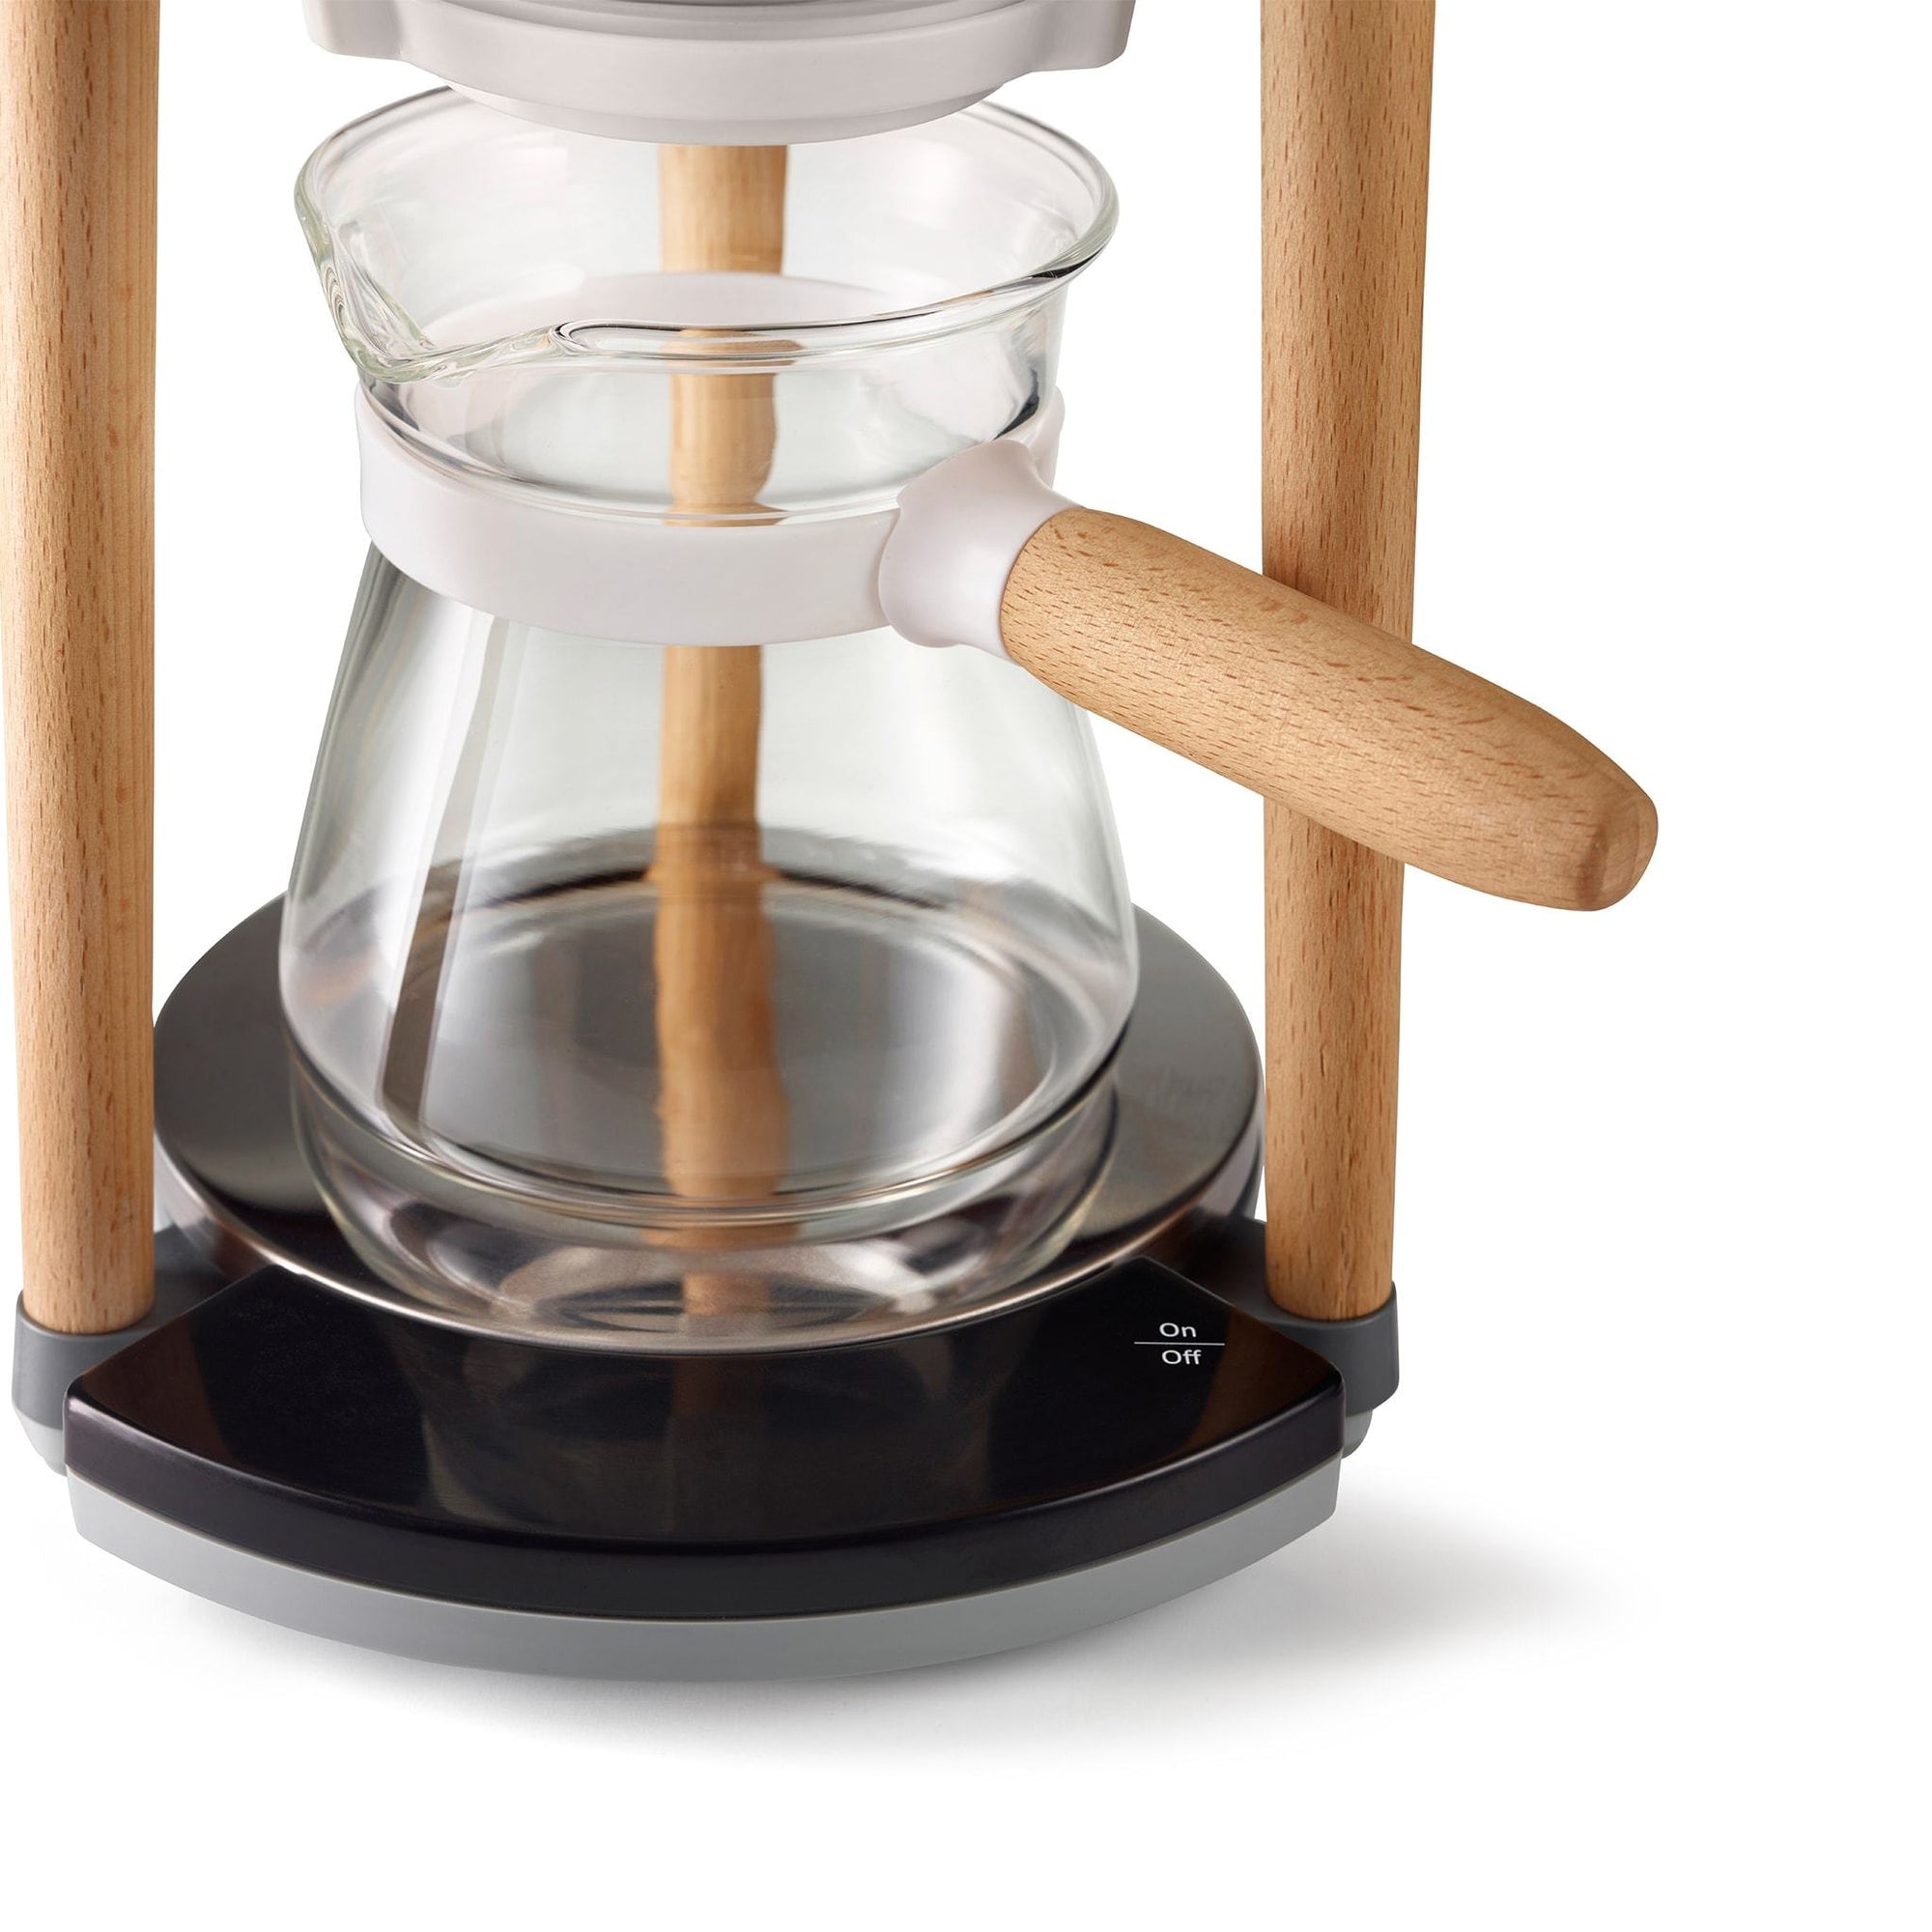 Making lots of pour-over coffee is easy — and stylish — with the